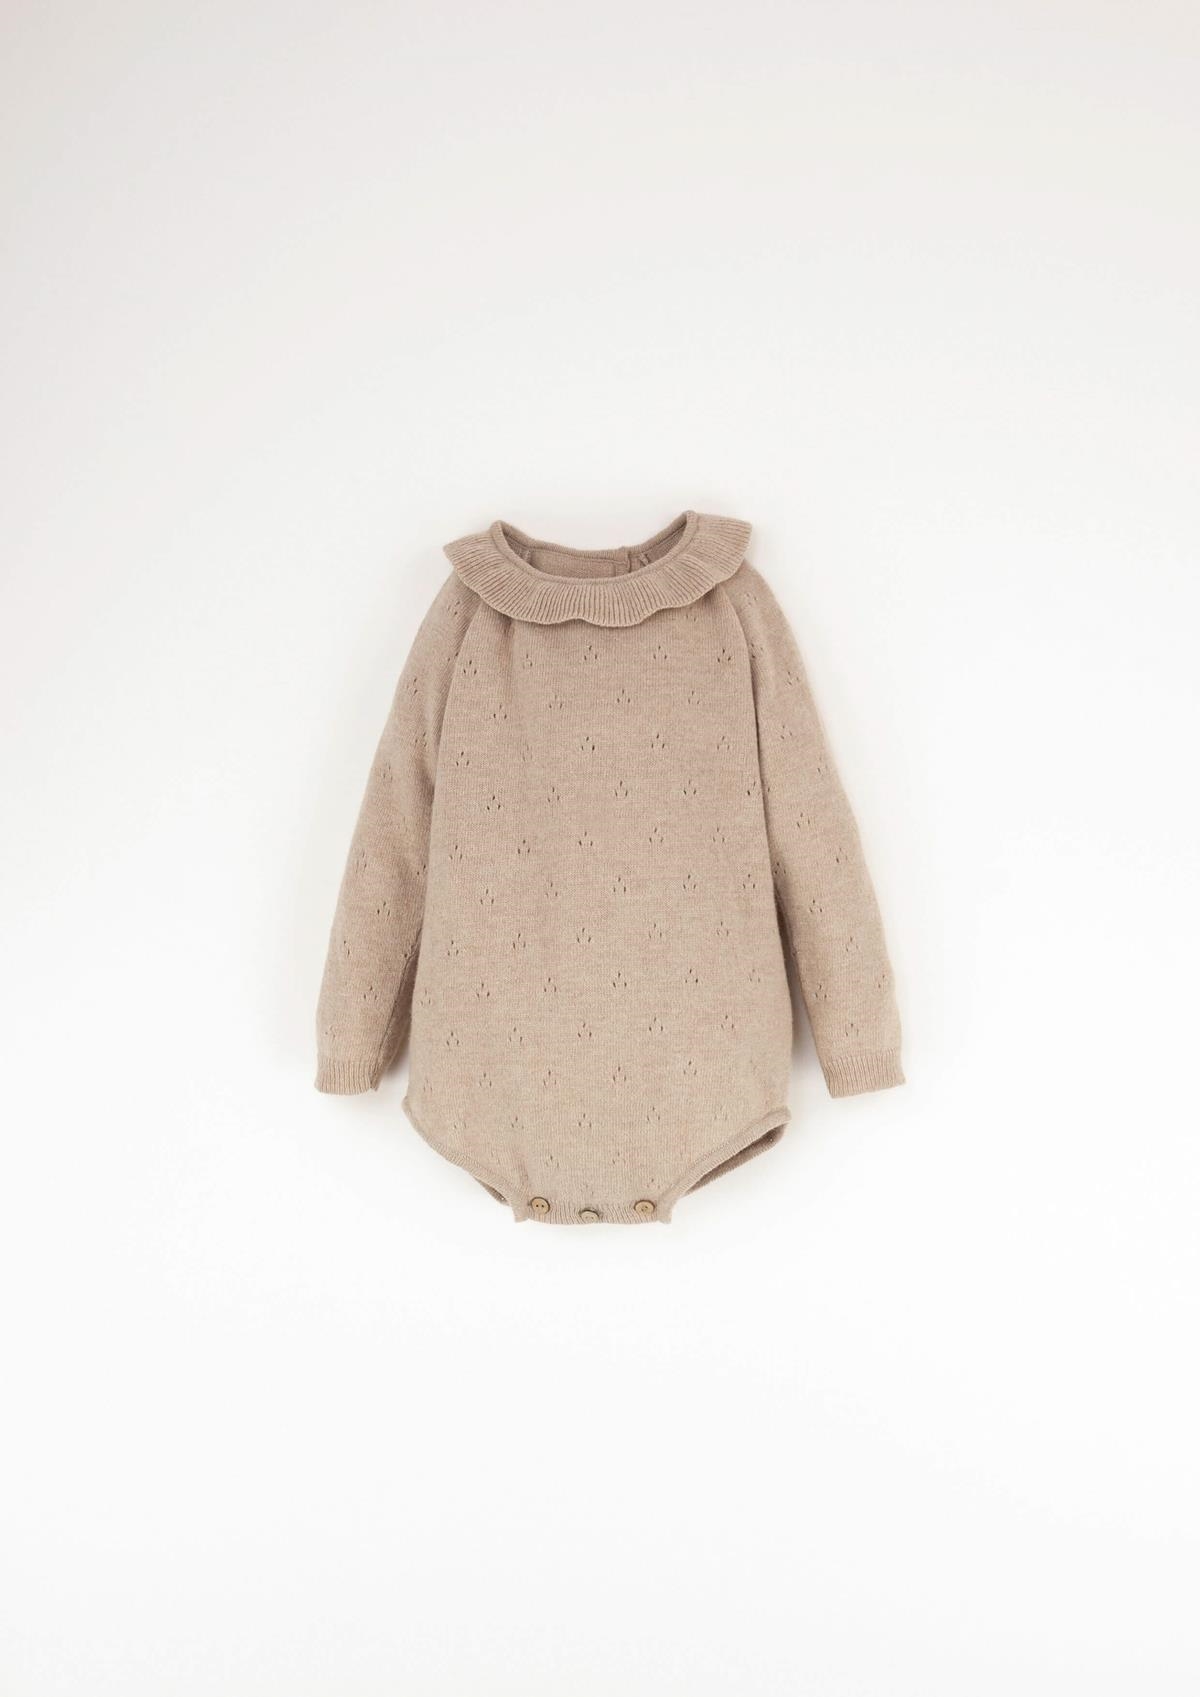 Mod.5.2 Beige knitted romper suit with frilled collar | AW23.24 Mod.5.2 Beige knitted romper suit with frilled collar